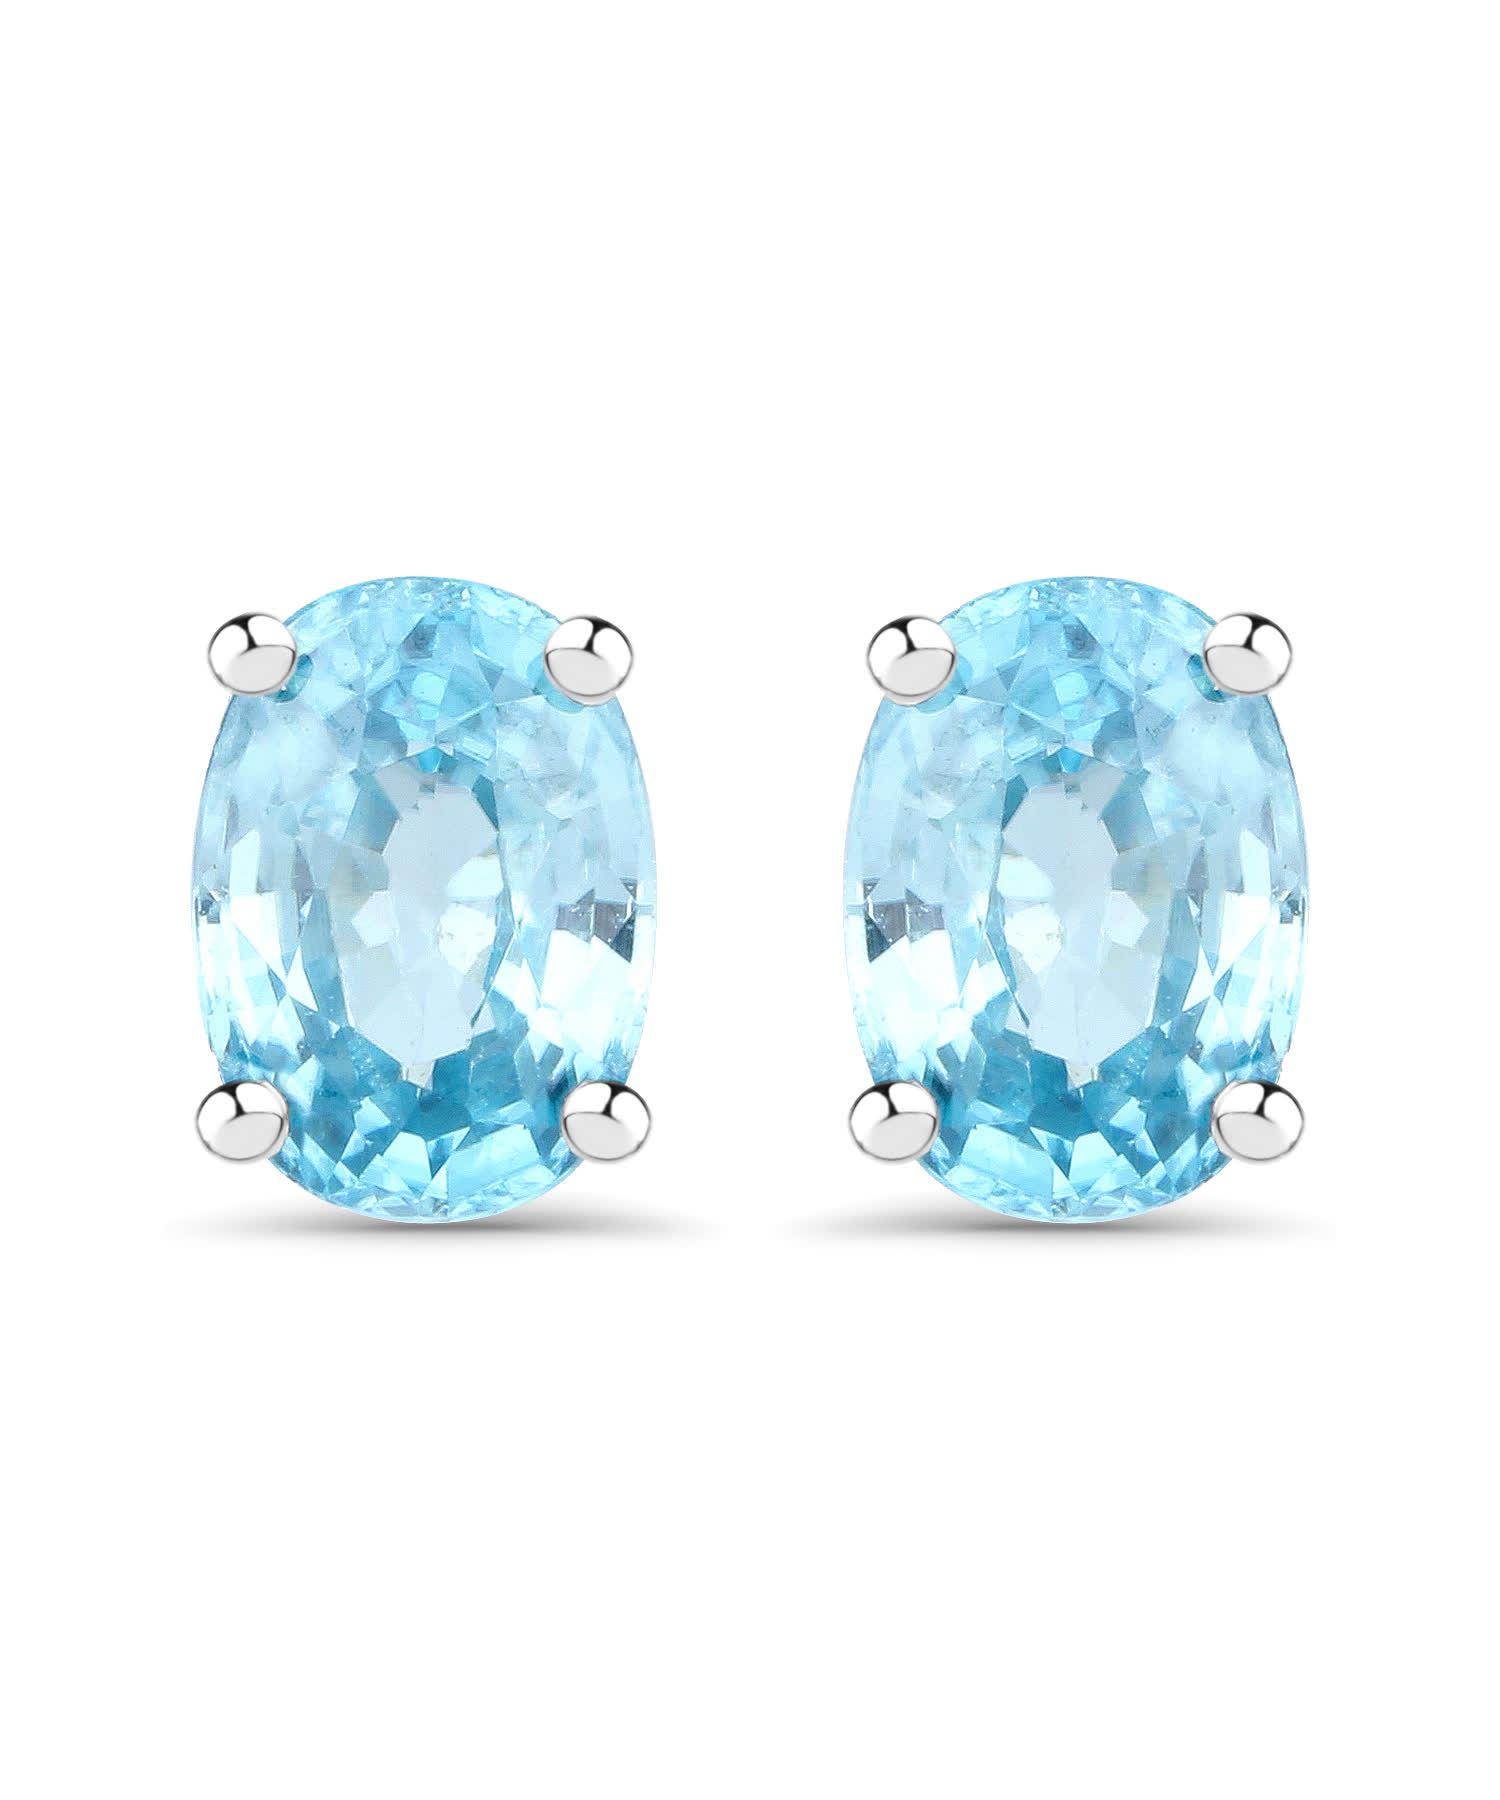 2.40ctw Natural Zircon Rhodium Plated 925 Sterling Silver Stud Earrings View 1